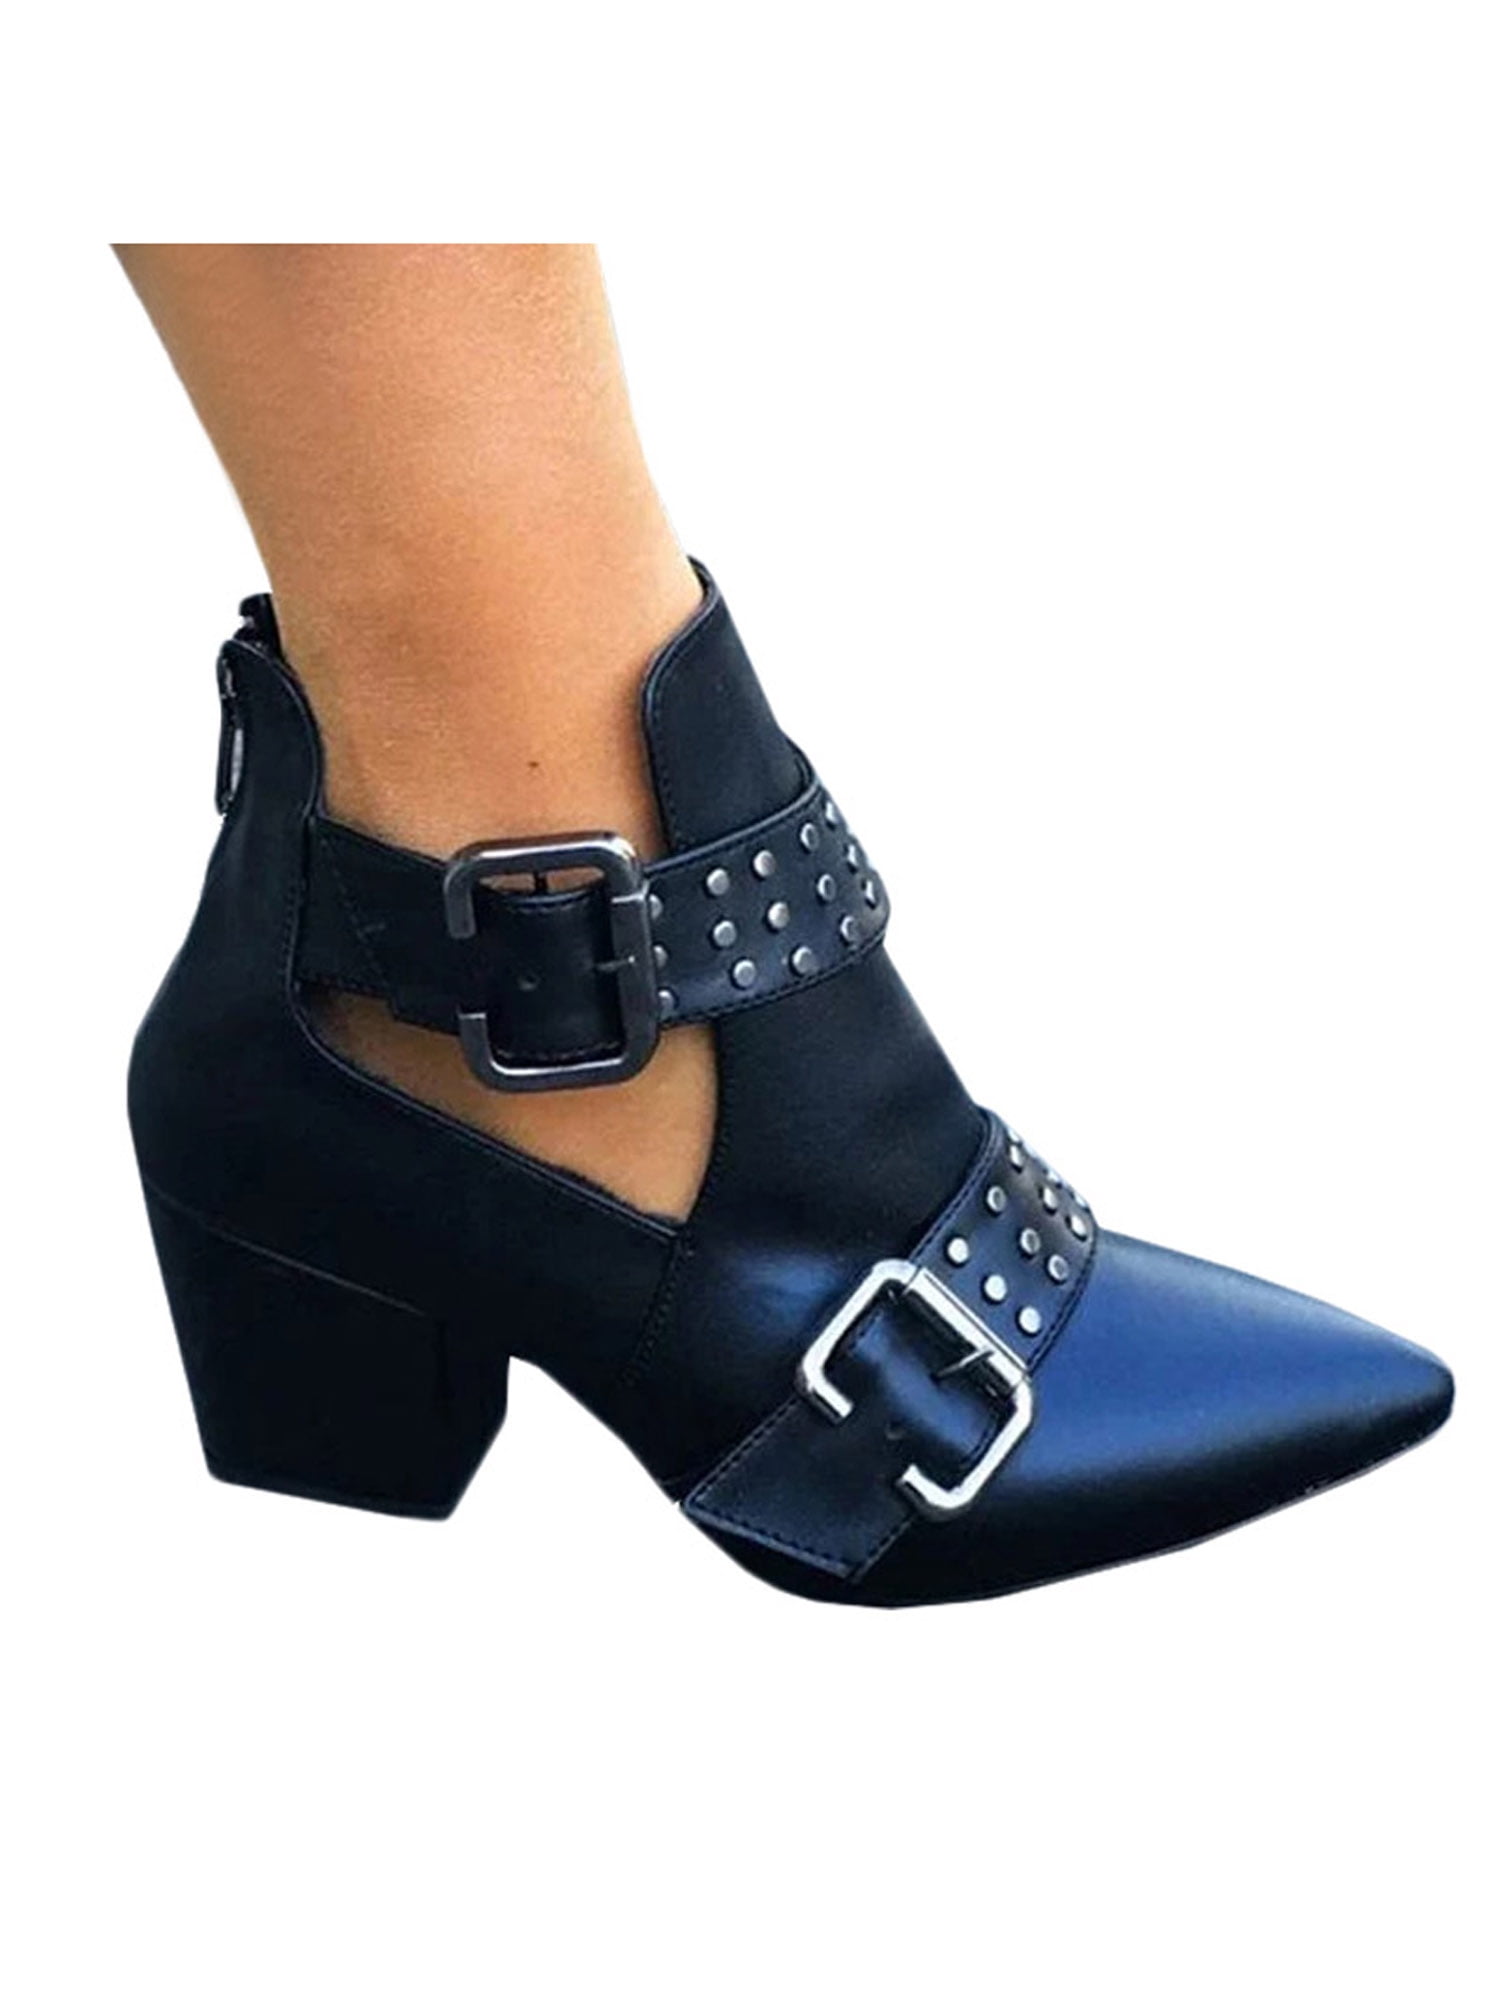 WOmen's Low Chunky Heels ROund toe Retro Buckle Zip Side Ankle Boots US5-9.5 